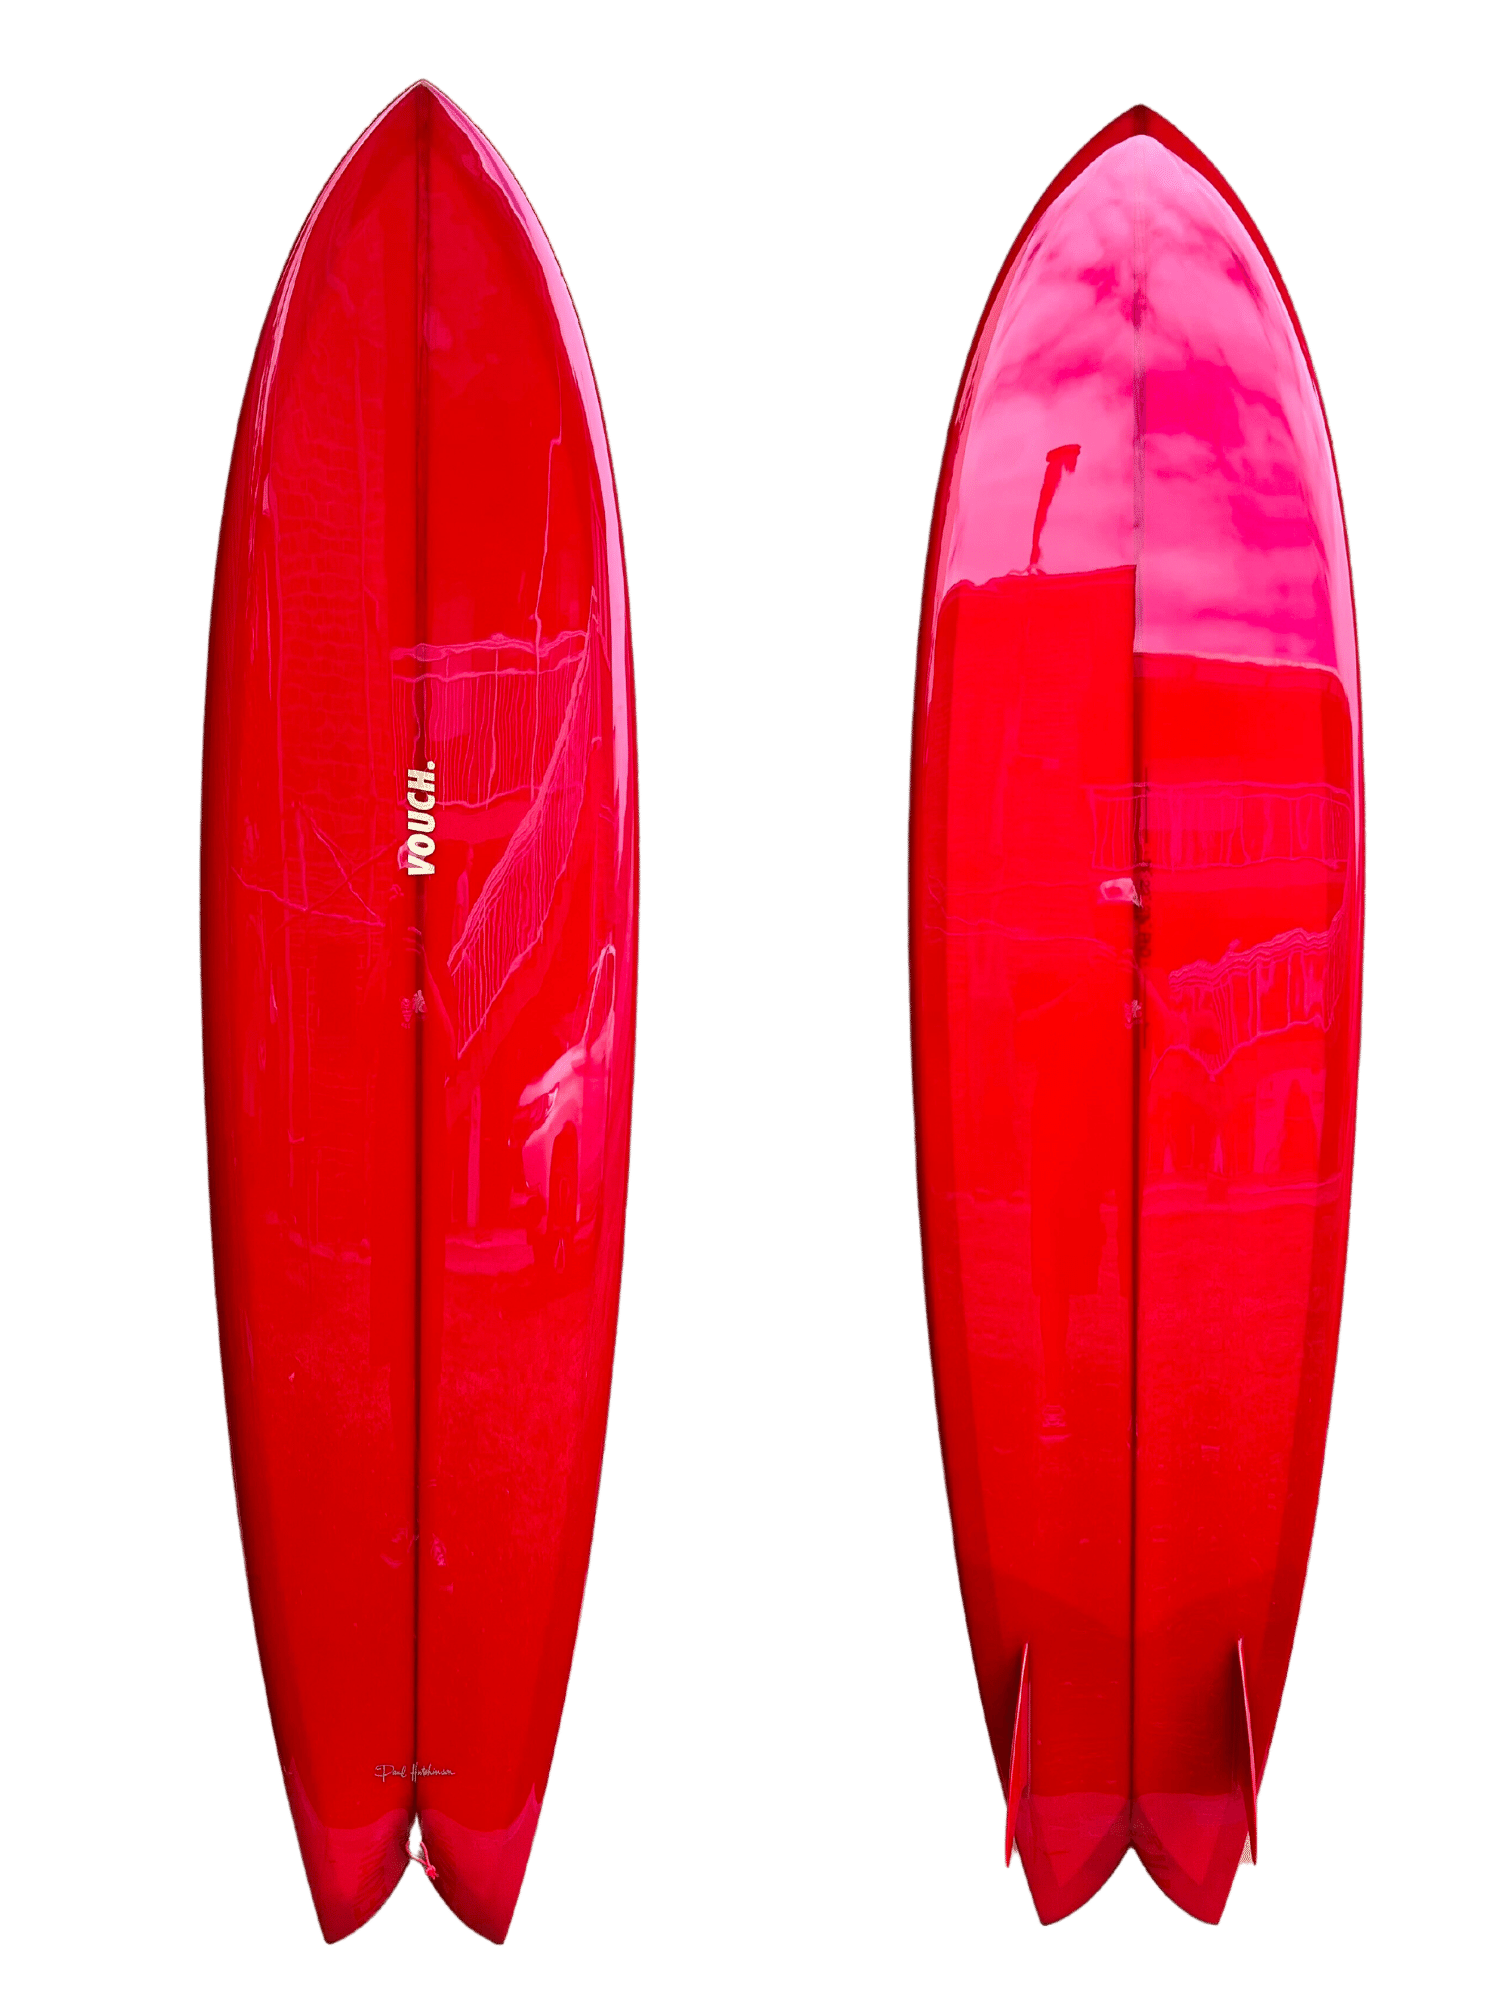 Vouch Surf 7'6" Mid Vish - Red Gloss